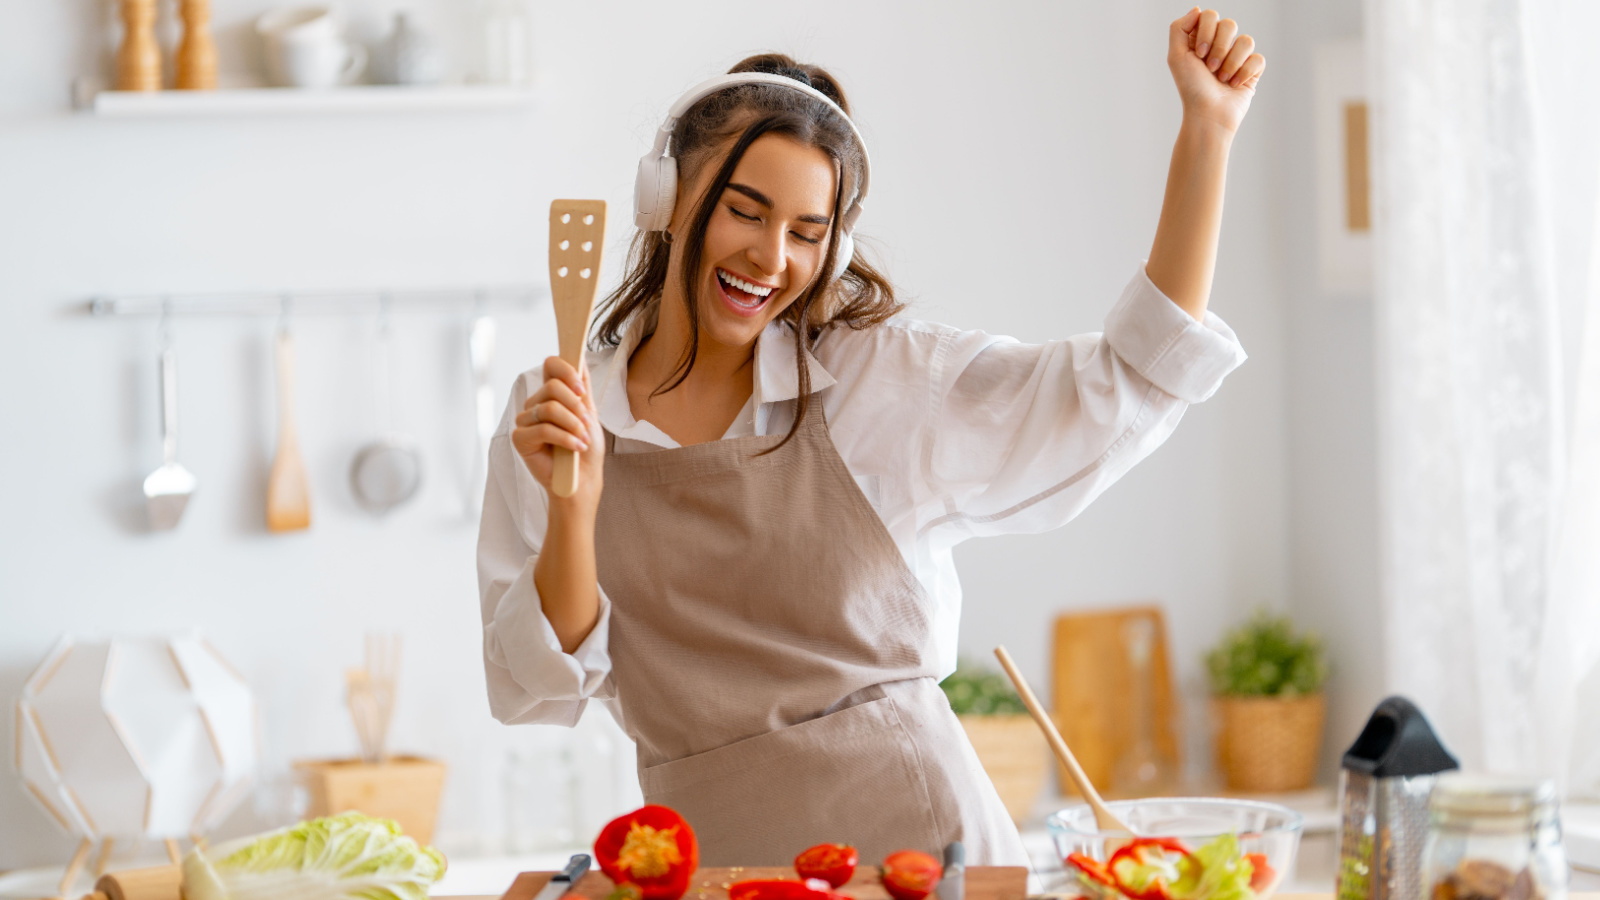 image credit Yuganov-Konstantin/Shutterstock <p>Put on some music and dance while you clean your house. Not only does it make the chore more enjoyable, but it also elevates your heart rate. You’ll get a cleaner house and a workout at the same time. “It feels less like a chore and more like a party,” says a commenter online.</p>